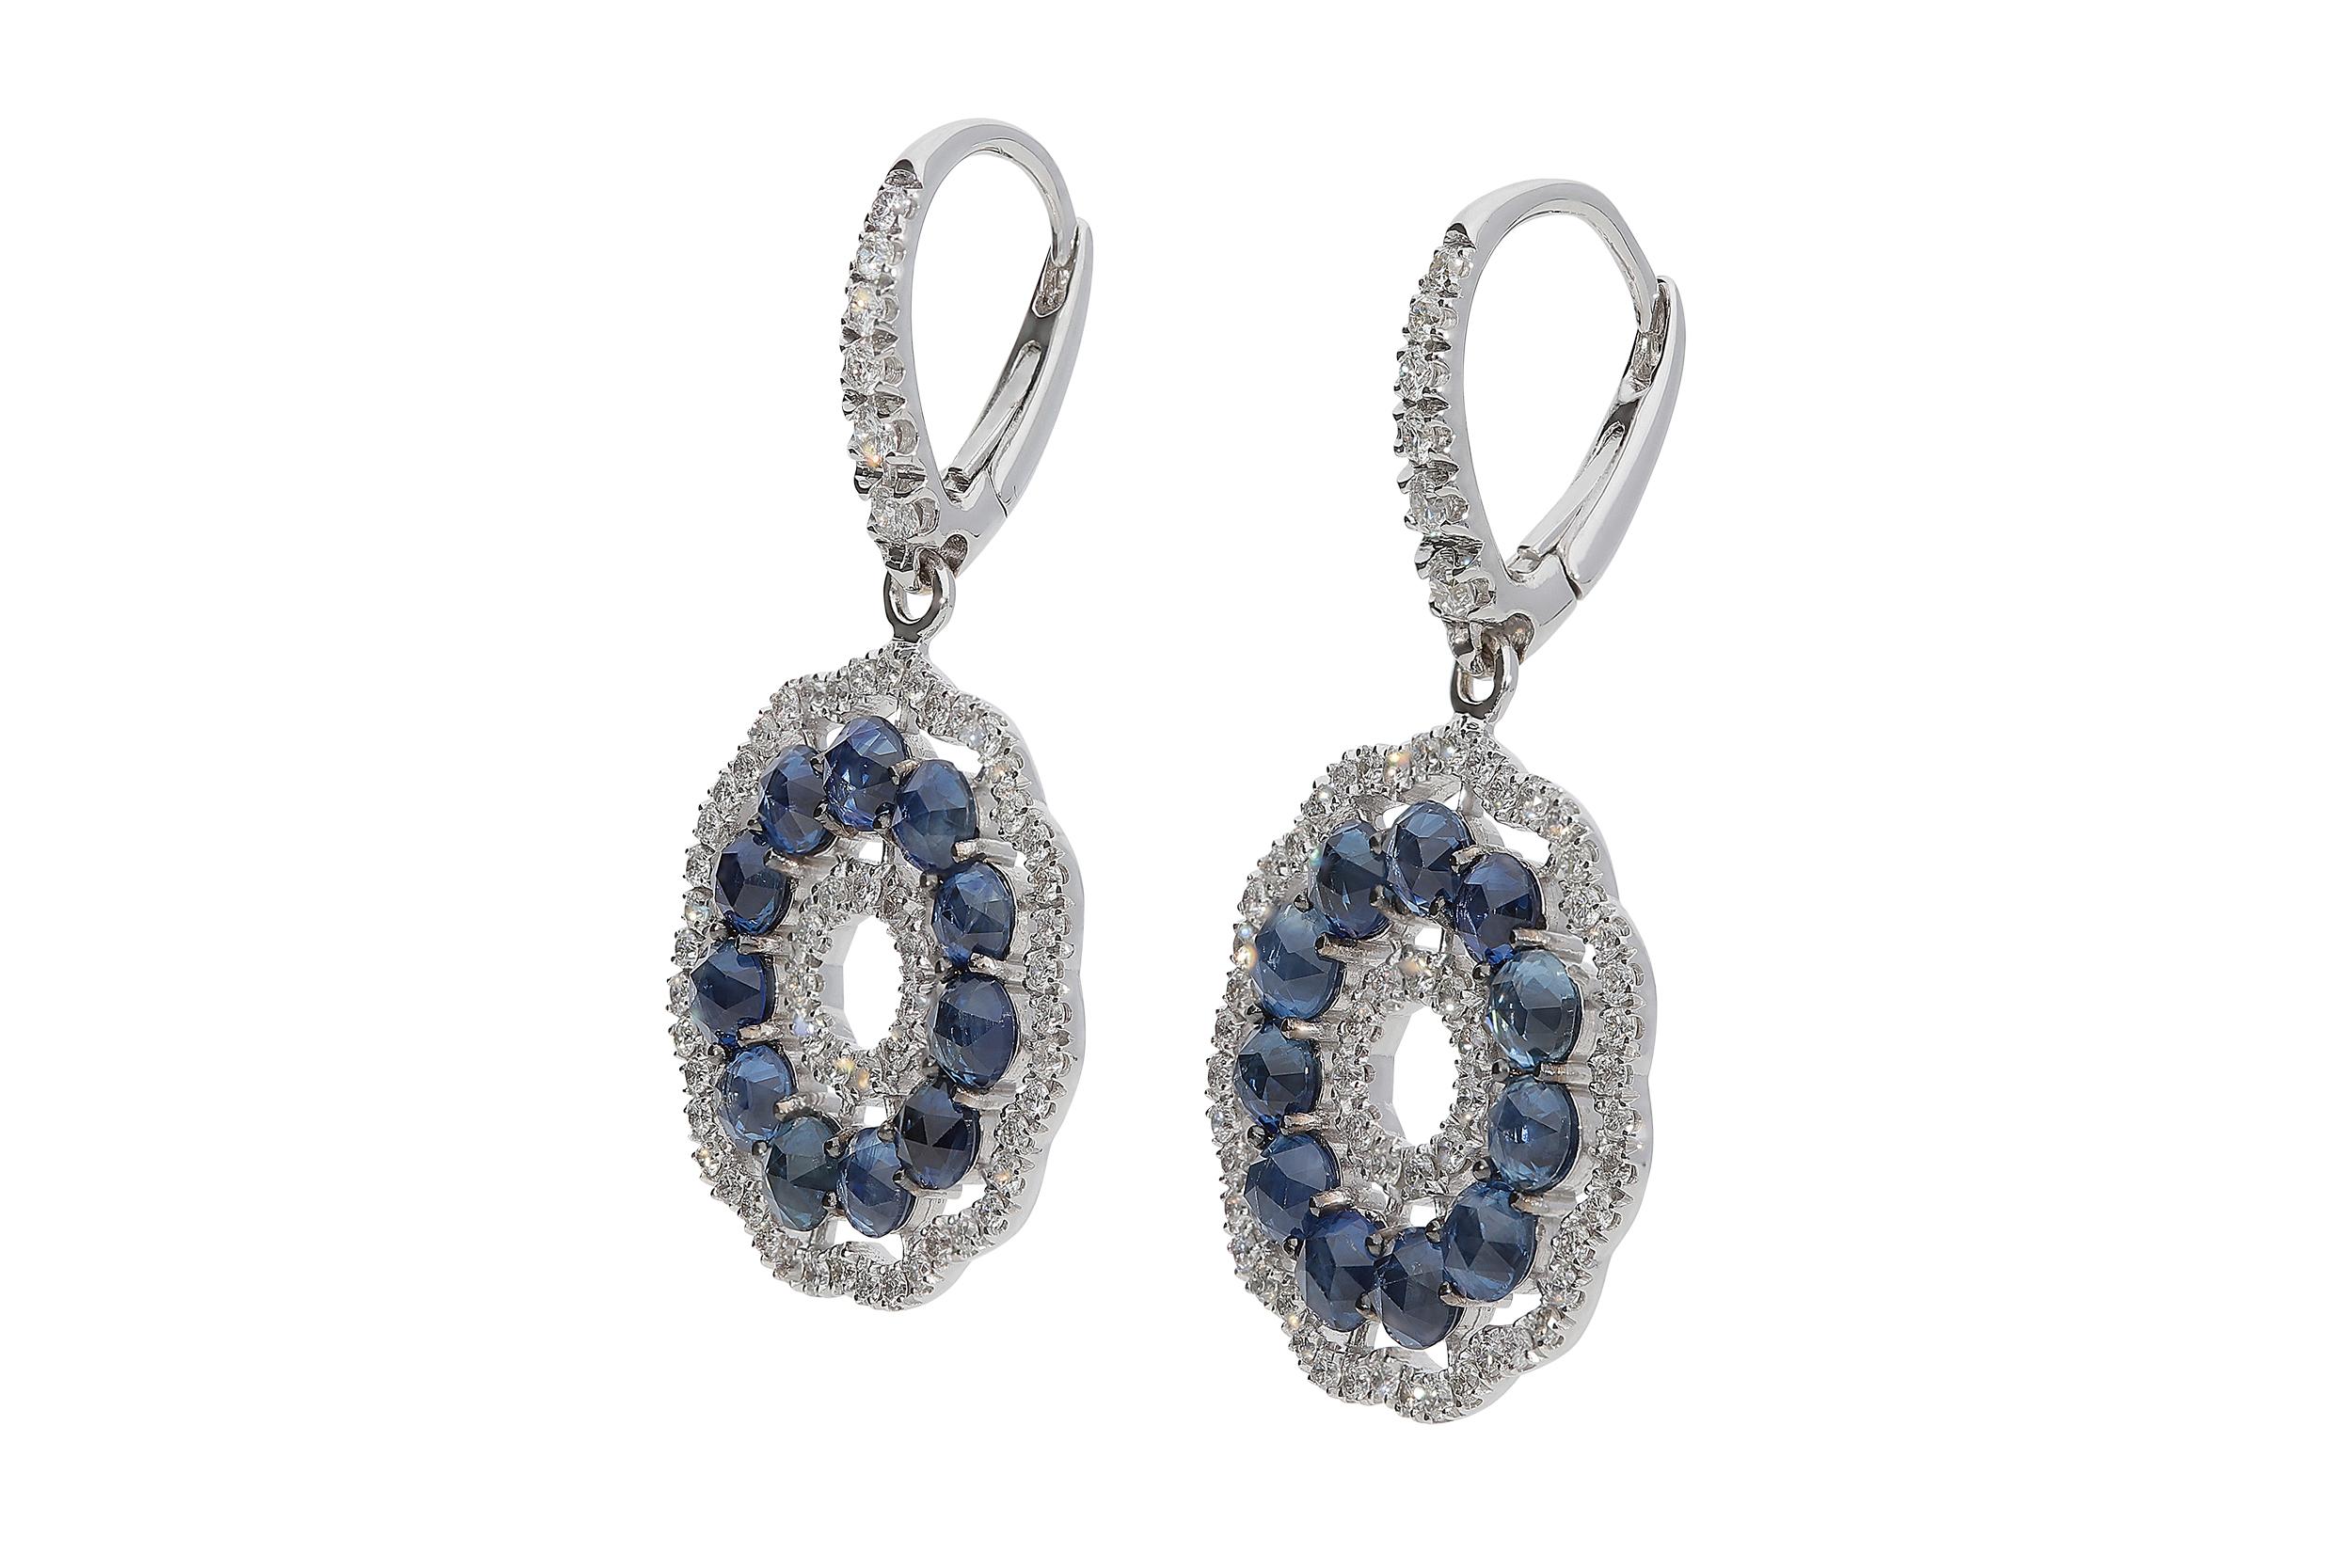 Amazing dangle earrings in 18kt white gold for 6,40 grams with 0,76 carat of white round brilliant diamonds and 3,01 carats of rose cut blue sapphires.
The width of the flower element is 1,80 centimeters and the total length is 3,00 centimeters.
A